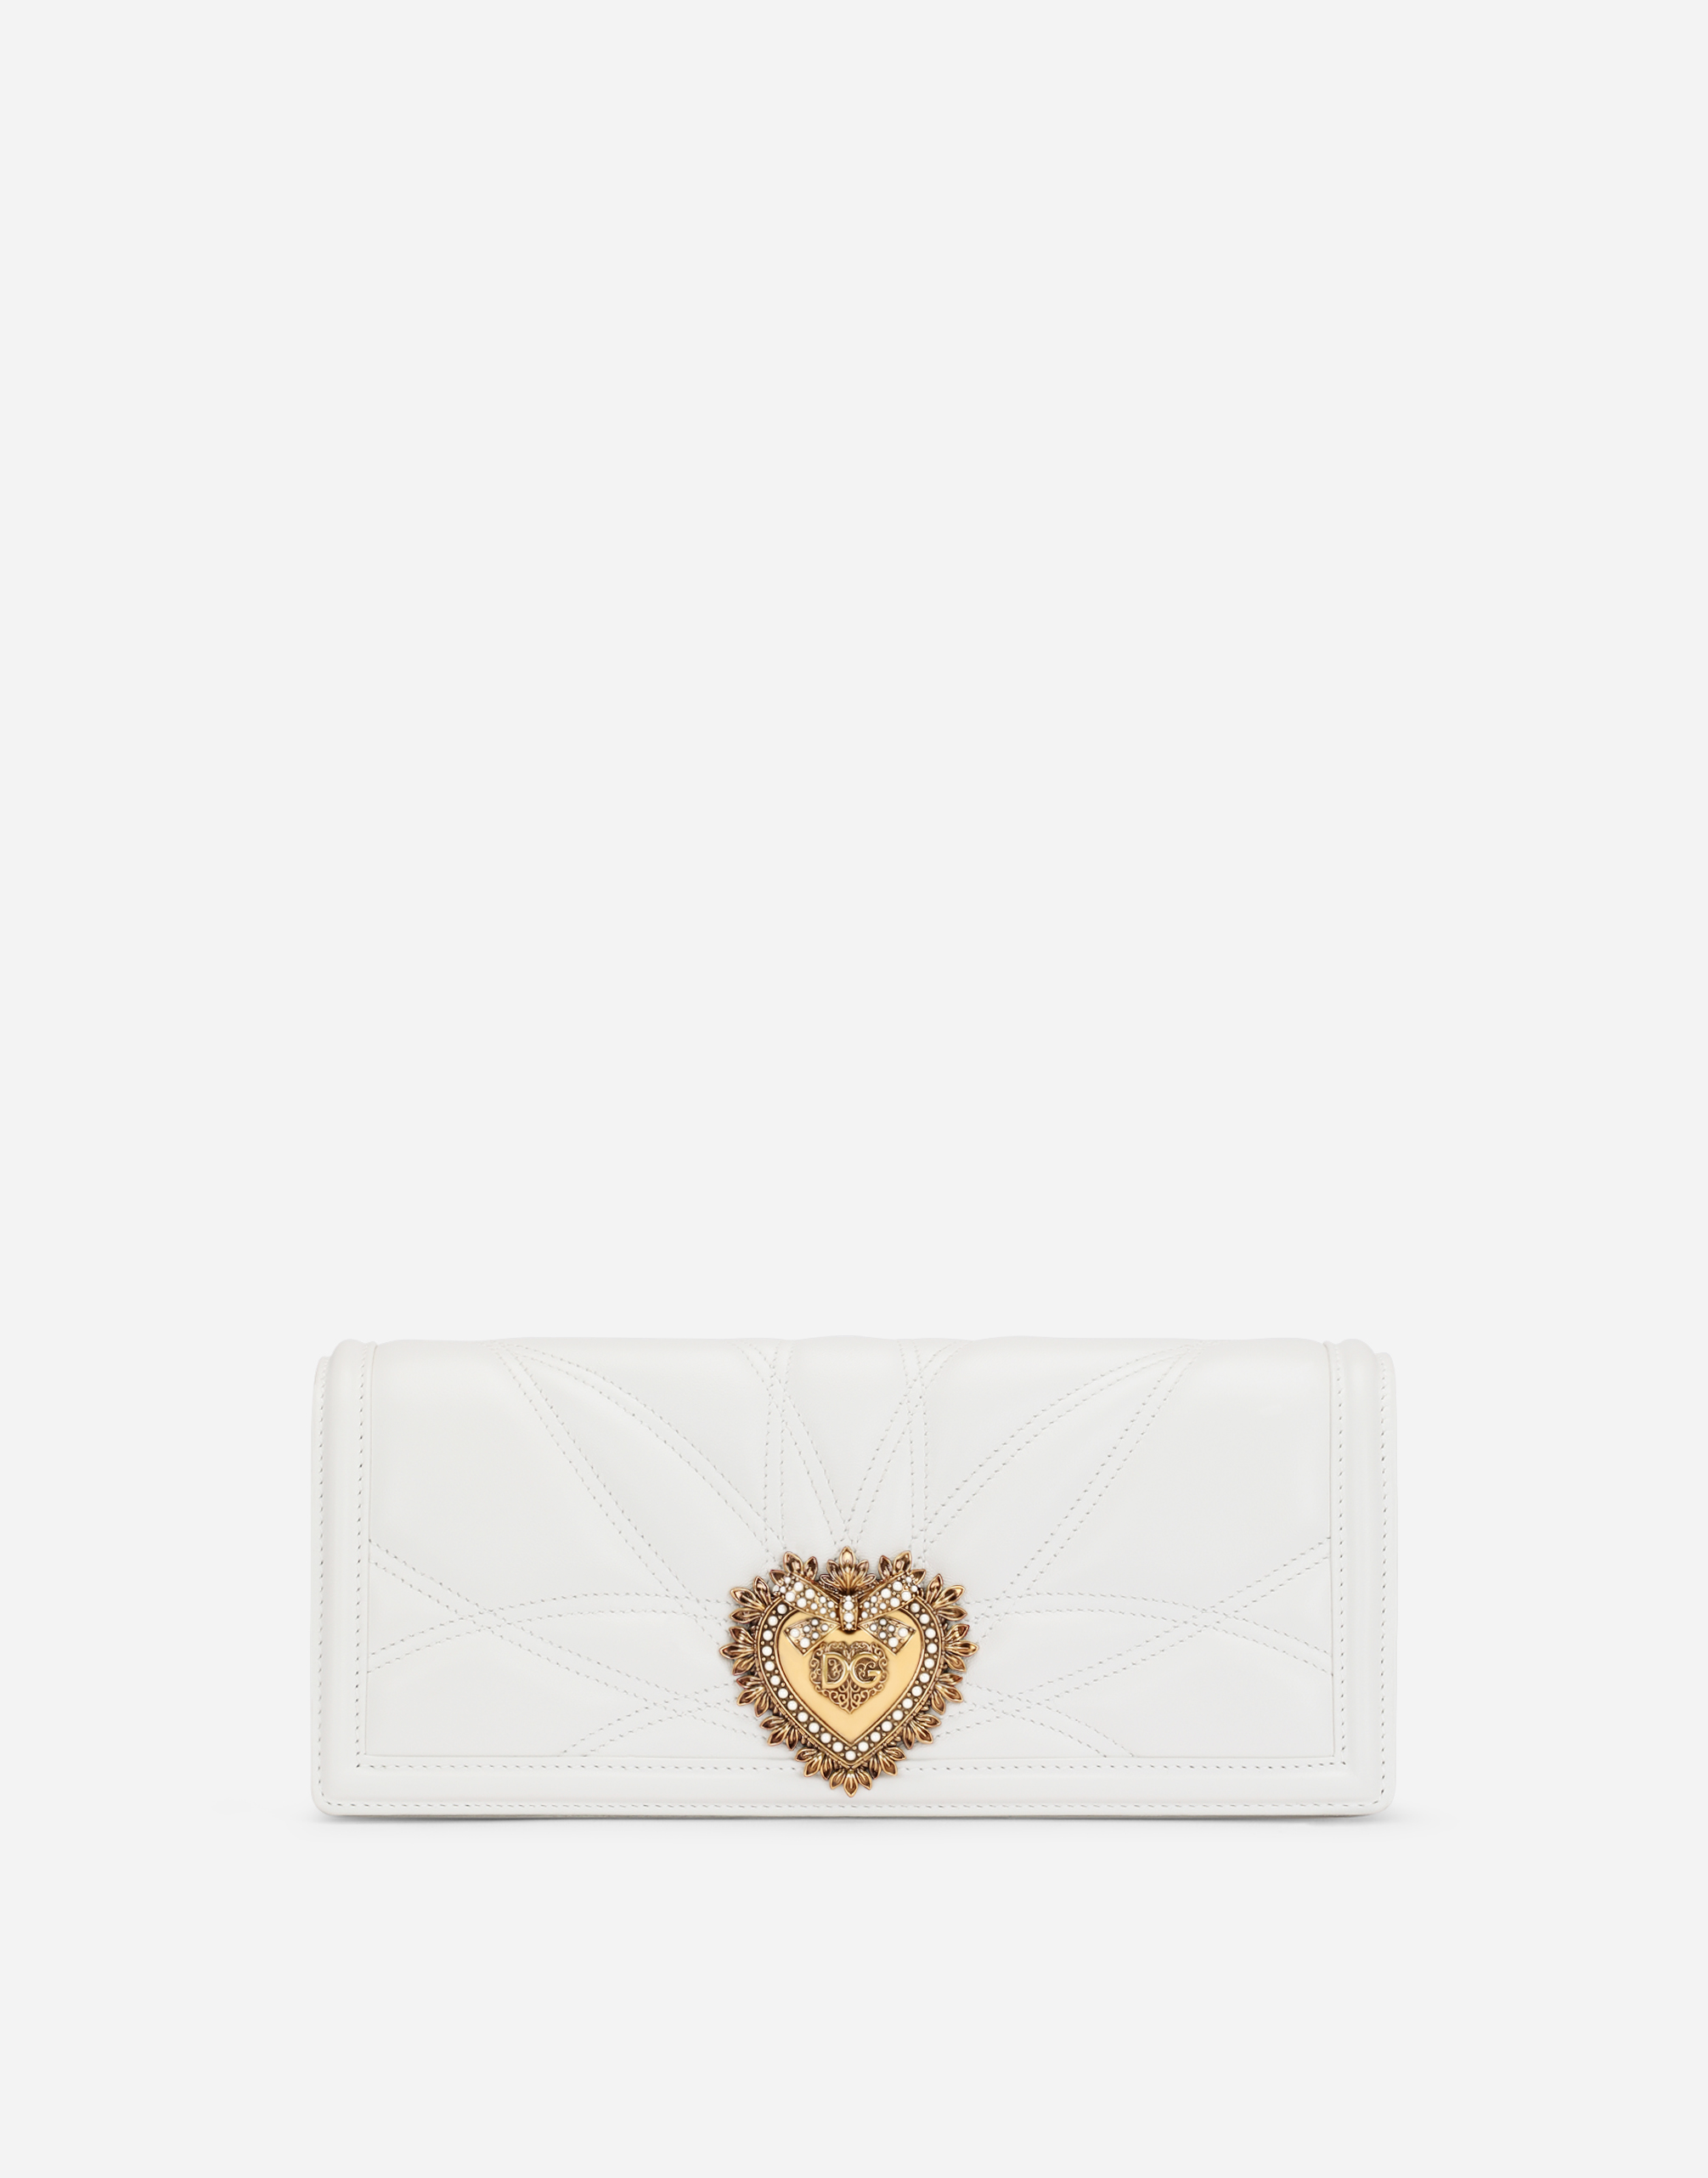 Dolce & Gabbana - The medium-sized white Devotion bag is embellished with  the exclusive bejewelled heart fastening. As a part of the Amore for  Scientific Research project, proceeds from online sales will